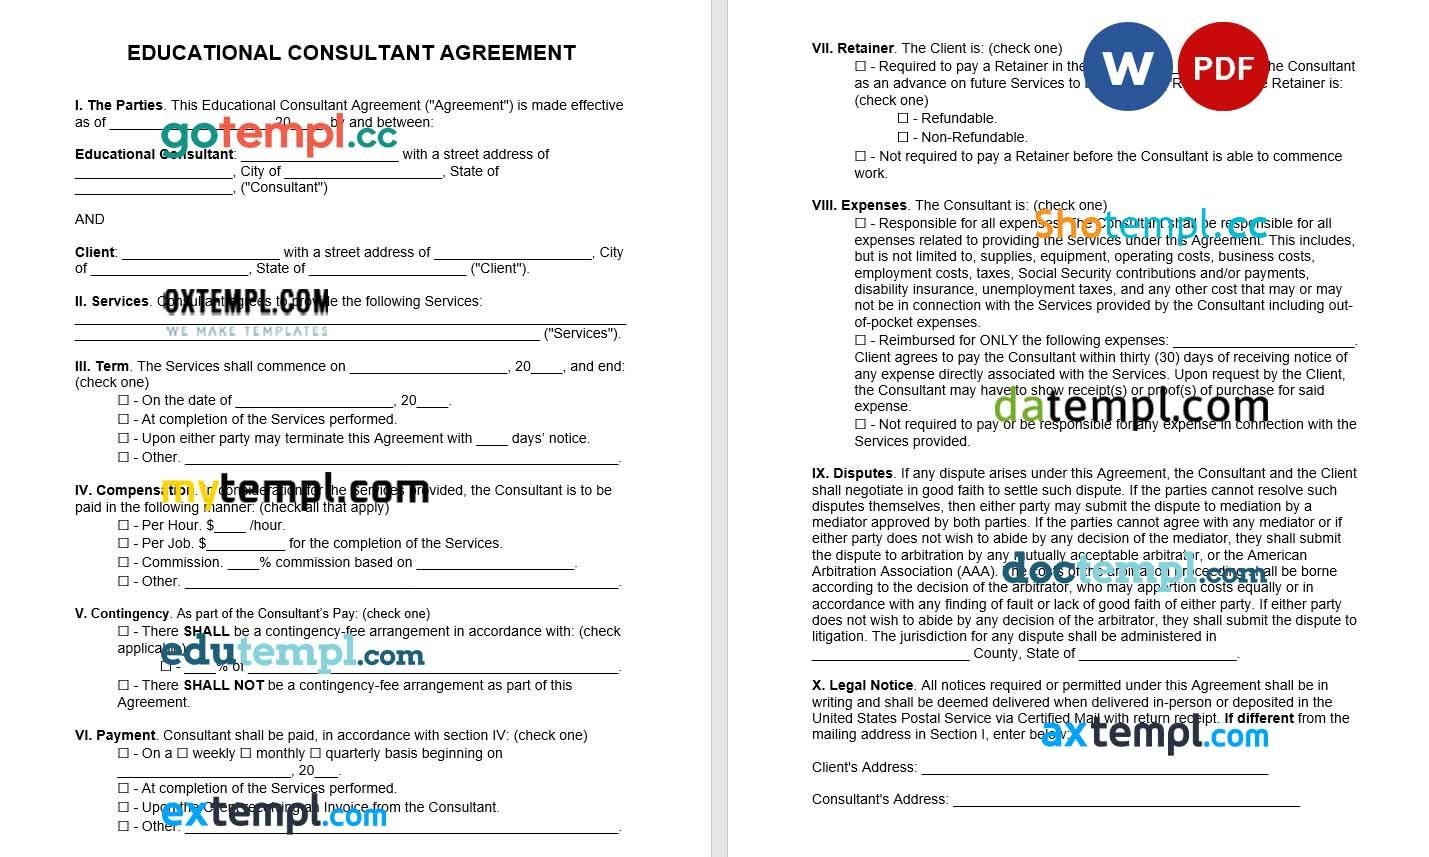 Educational Consultant Agreement word example, fully editable